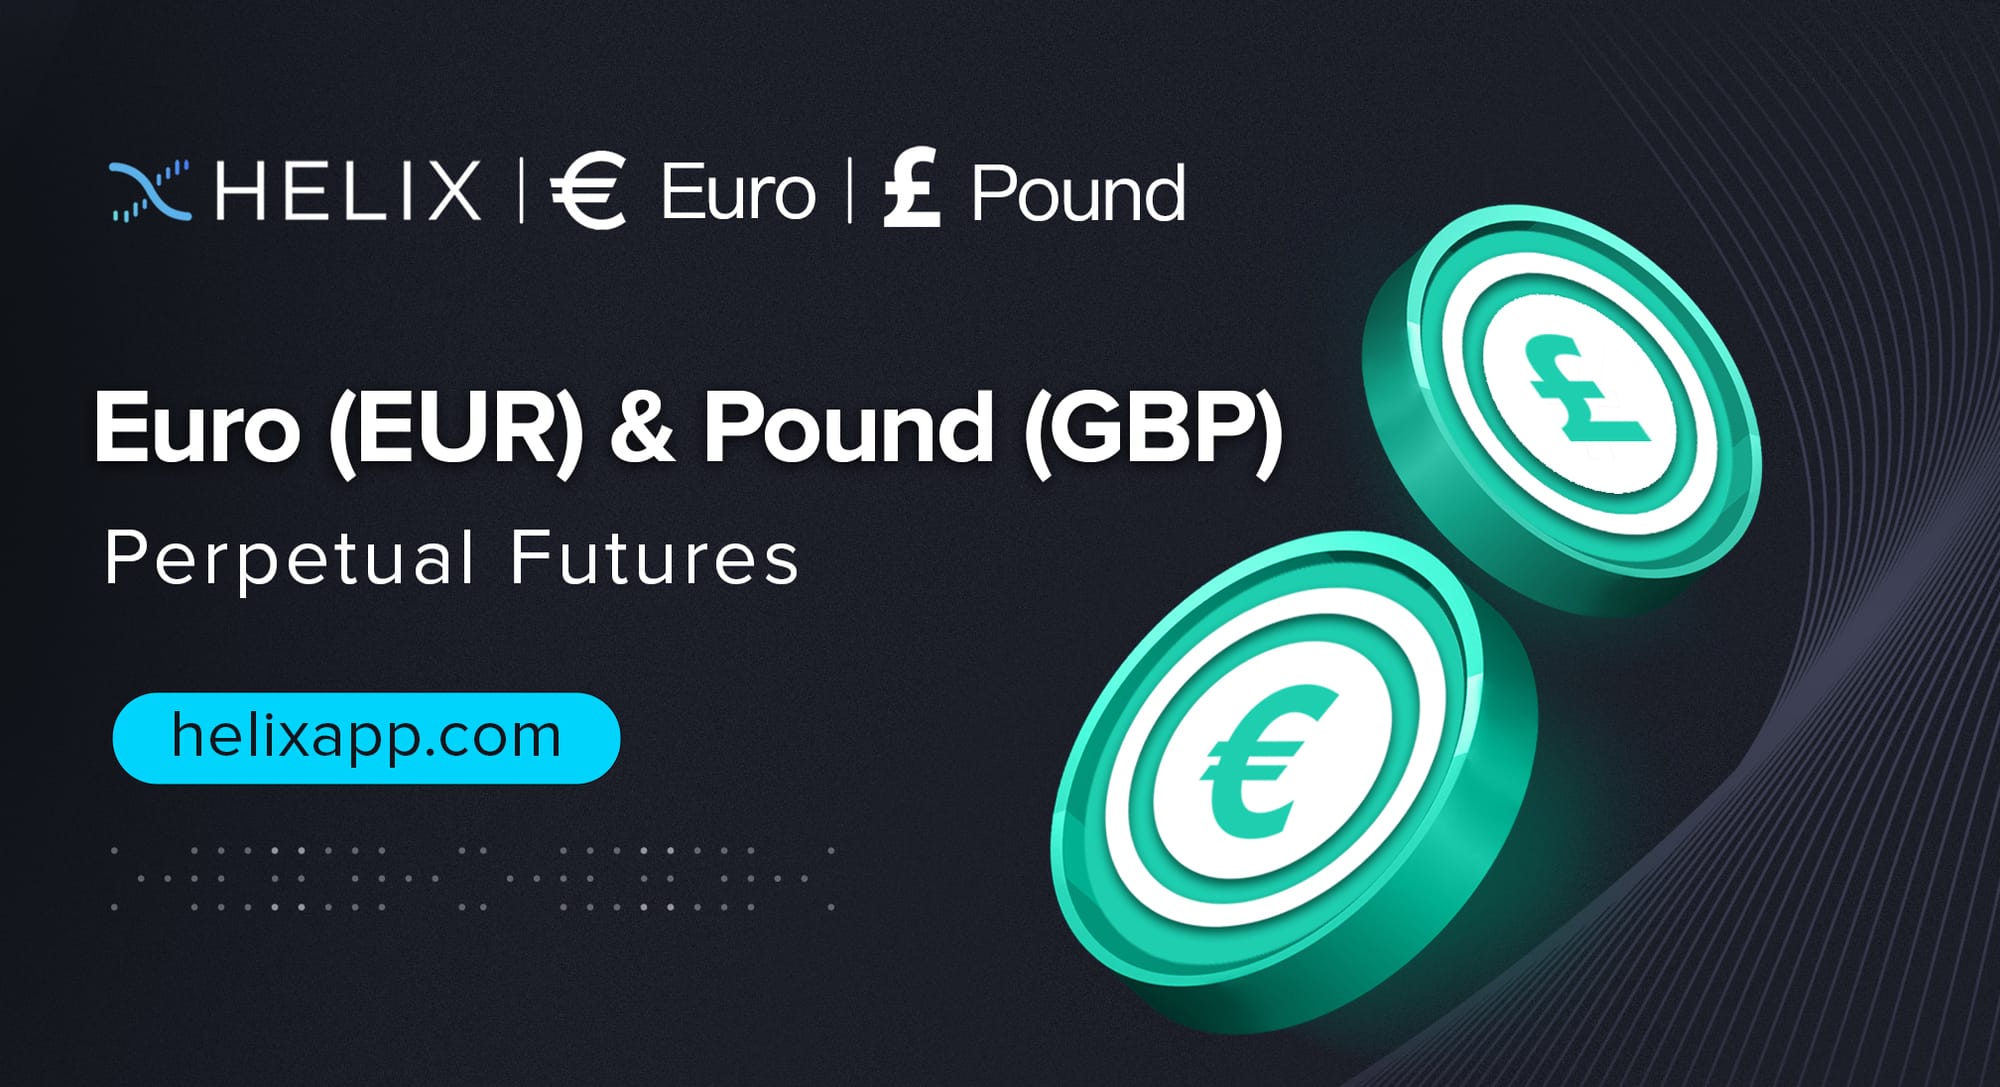 Decentralized Euro (EUR) and Pound (GBP) Perpetual Futures Listing on Helix